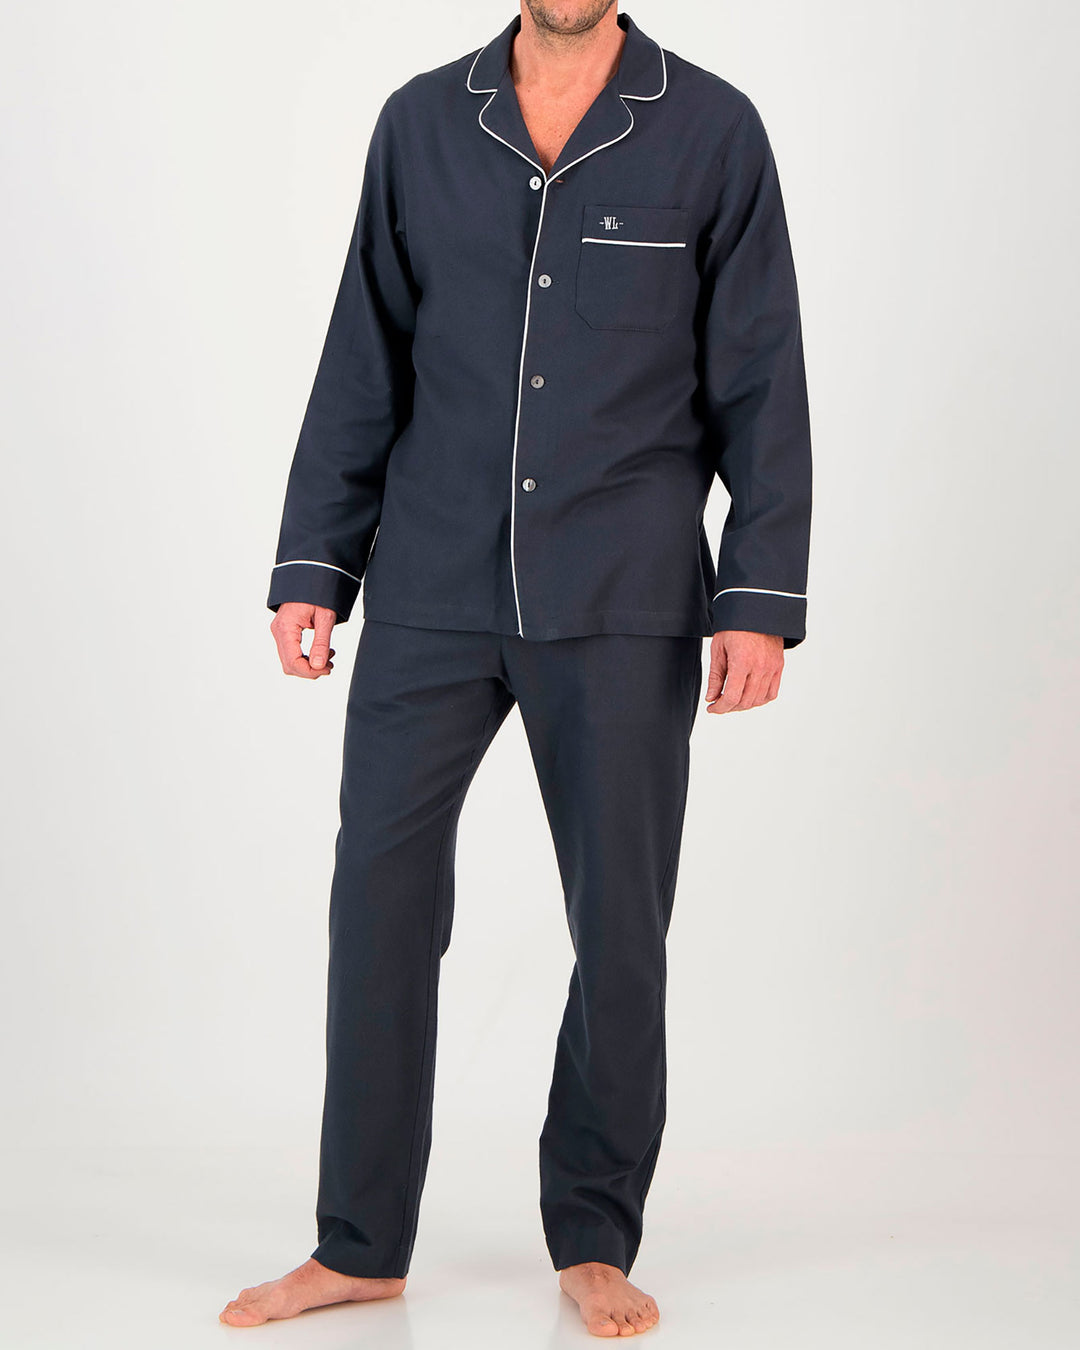 Mens Brushed Cotton Flannel Long Pyjamas in Charcoal with White Piping Front - Woodstock Laundry UK